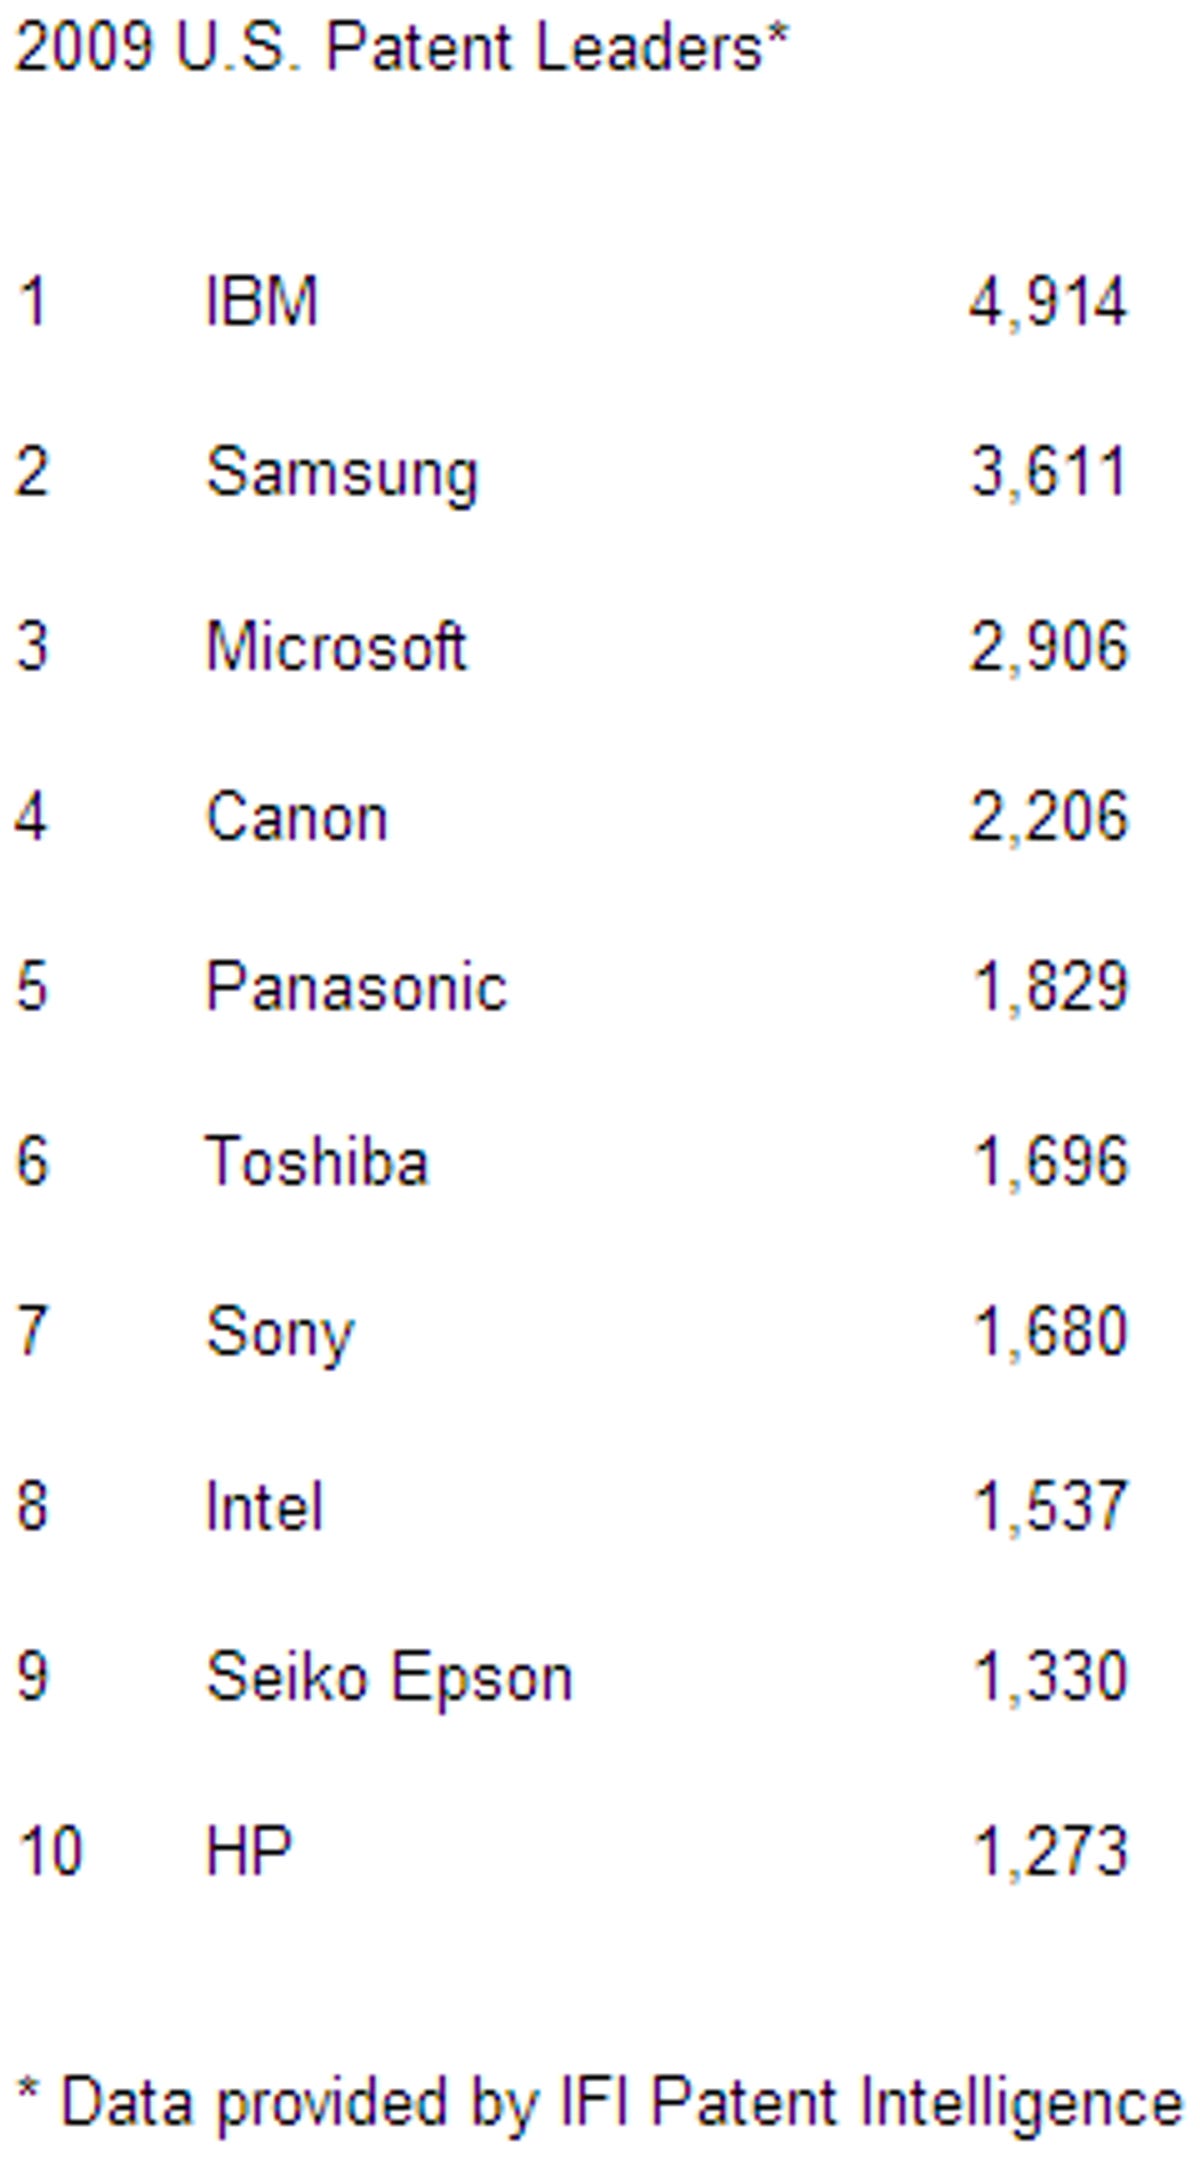 Top 10 patent holders for 2009